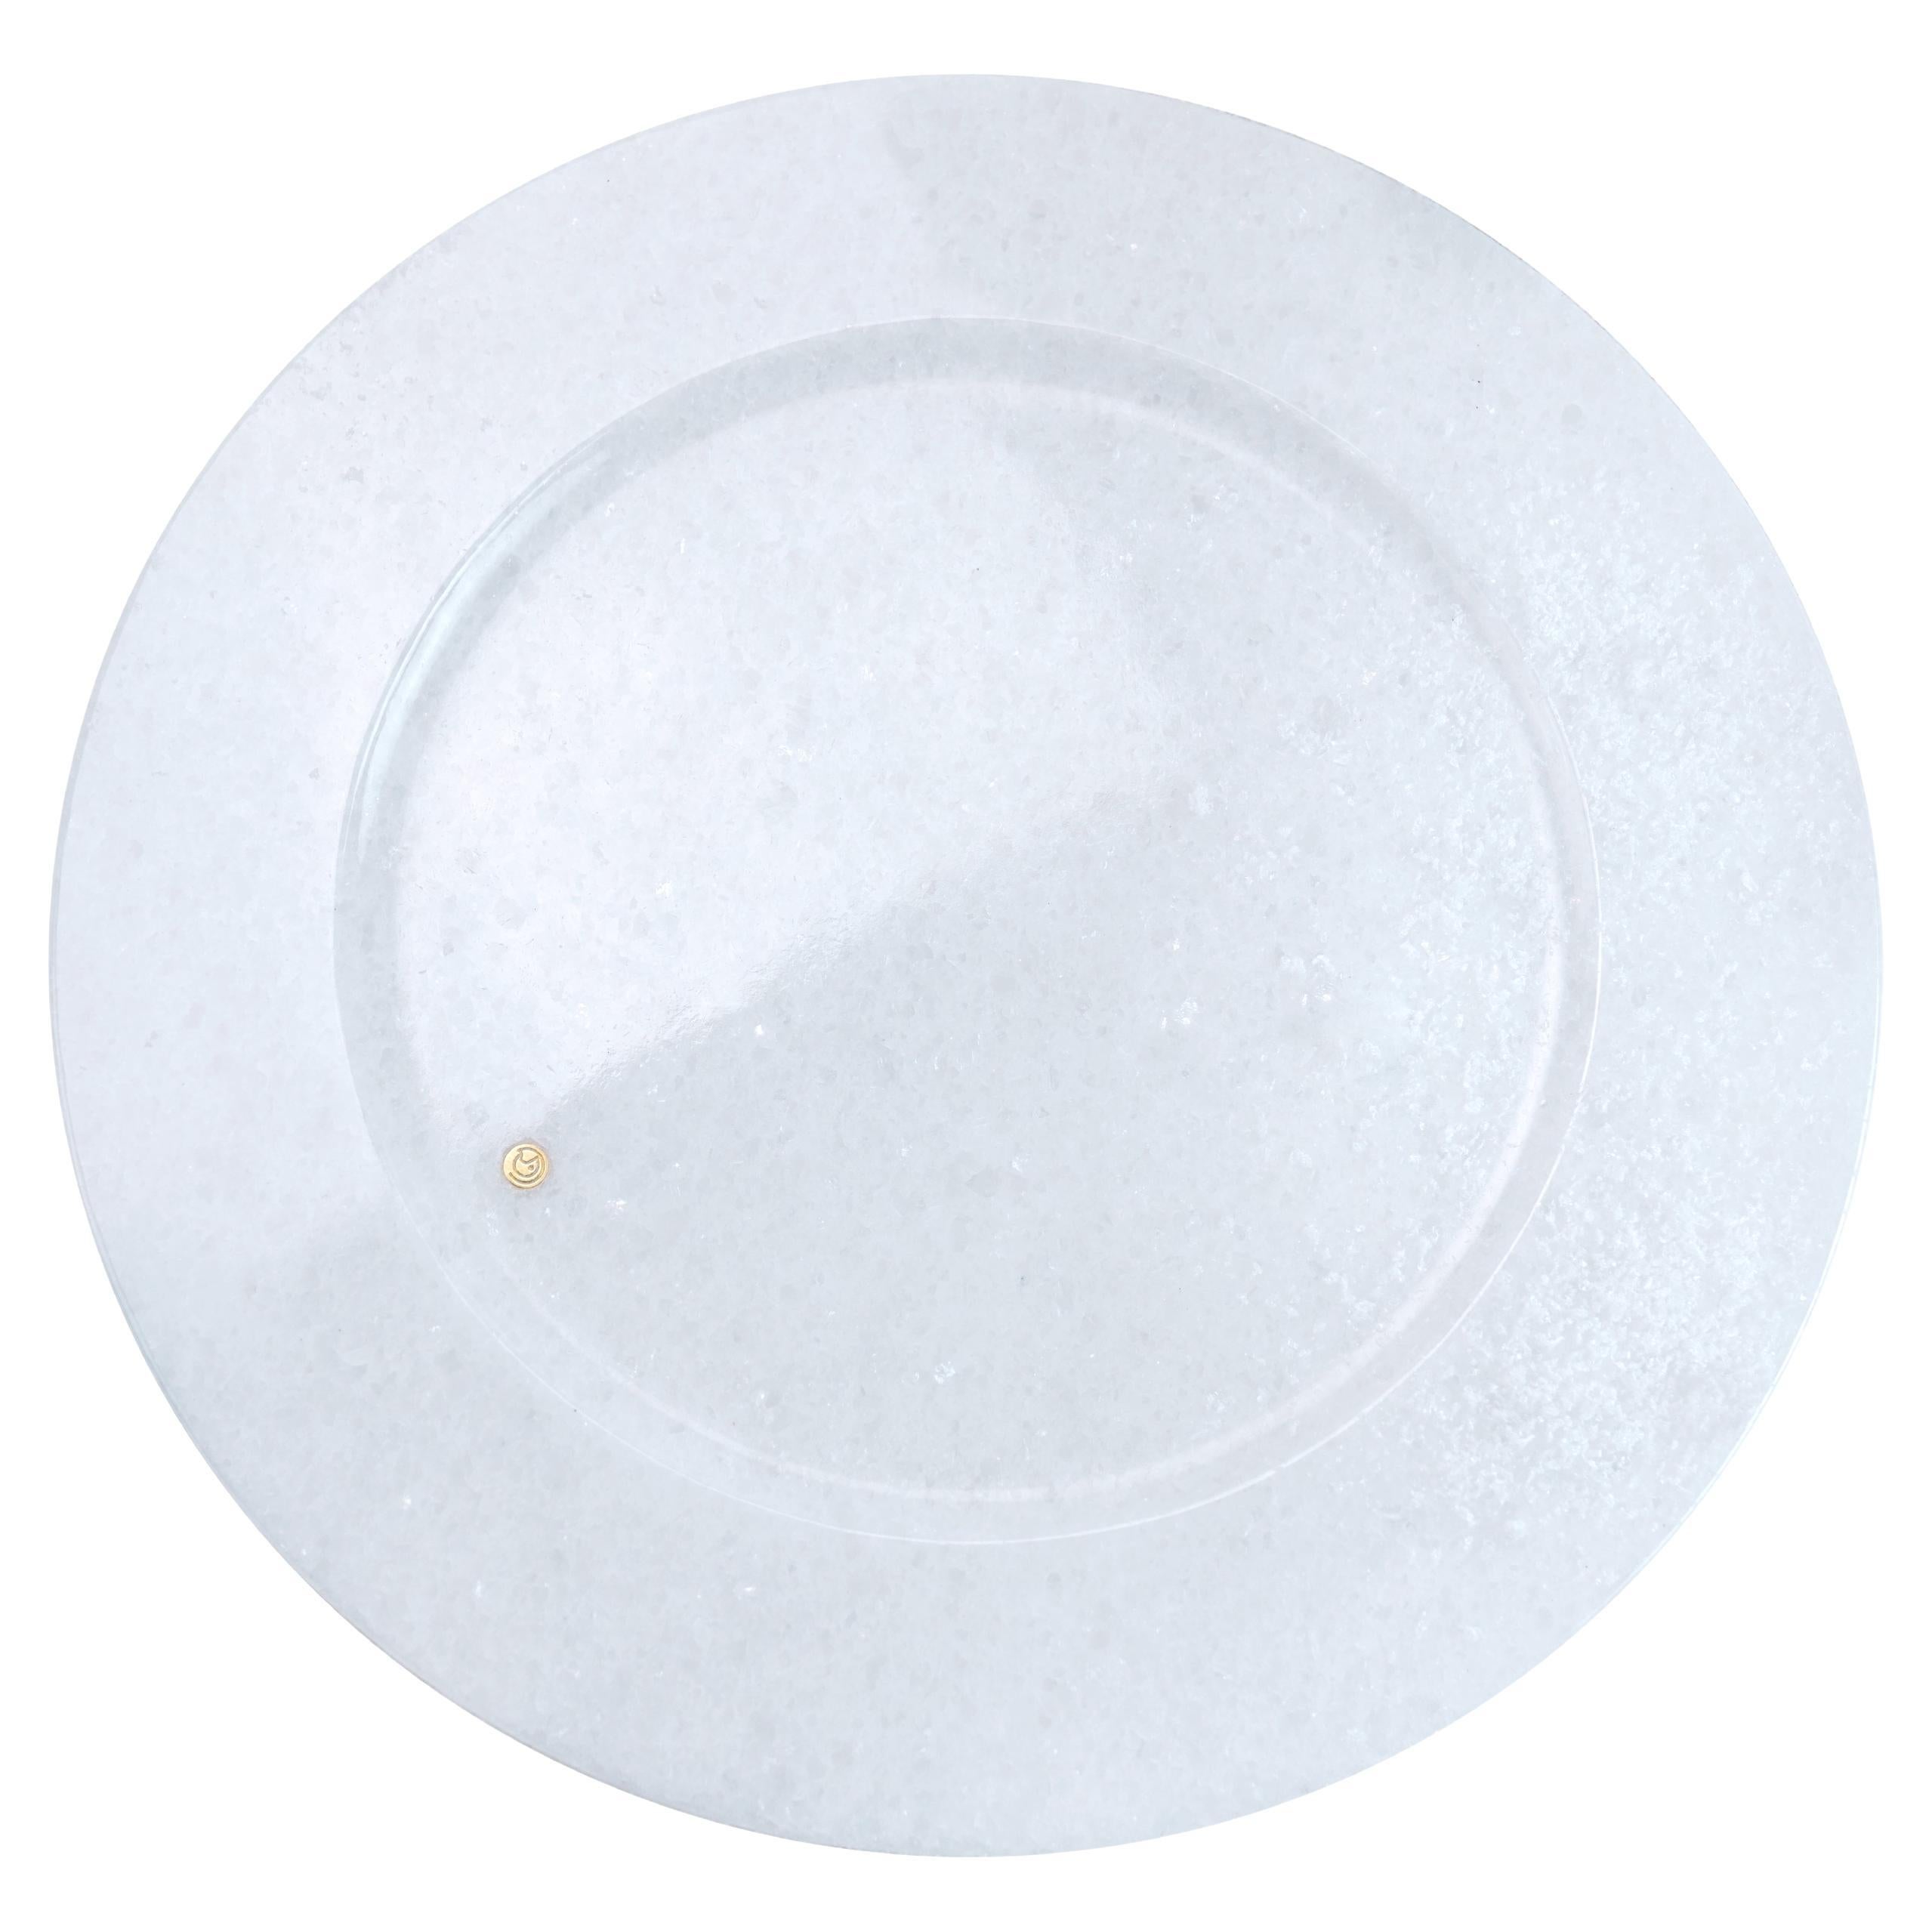 Absolute White Marble Charger Plate Christmas Decor Table Tableware Made Italy For Sale